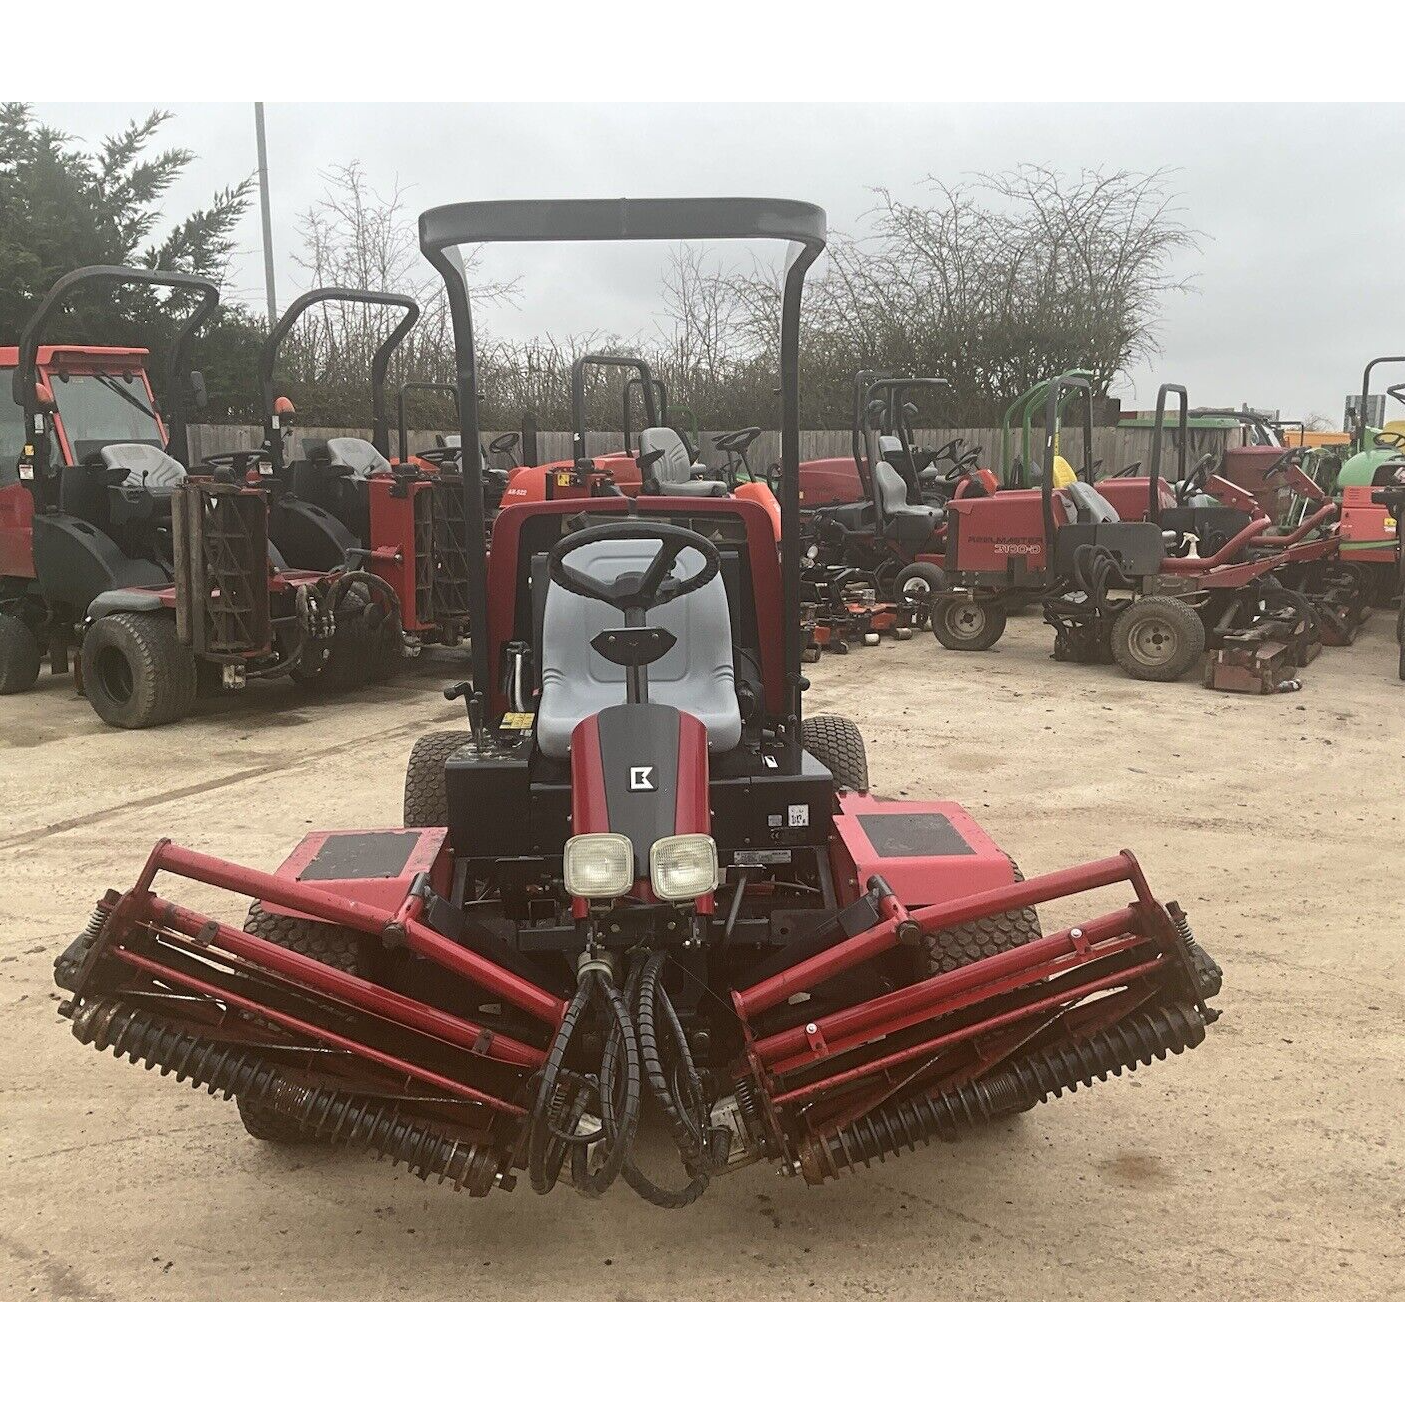 2012 BARONESS LM283 TRIPLE CYLINDER TEES RIDE ON LAWN MOWER